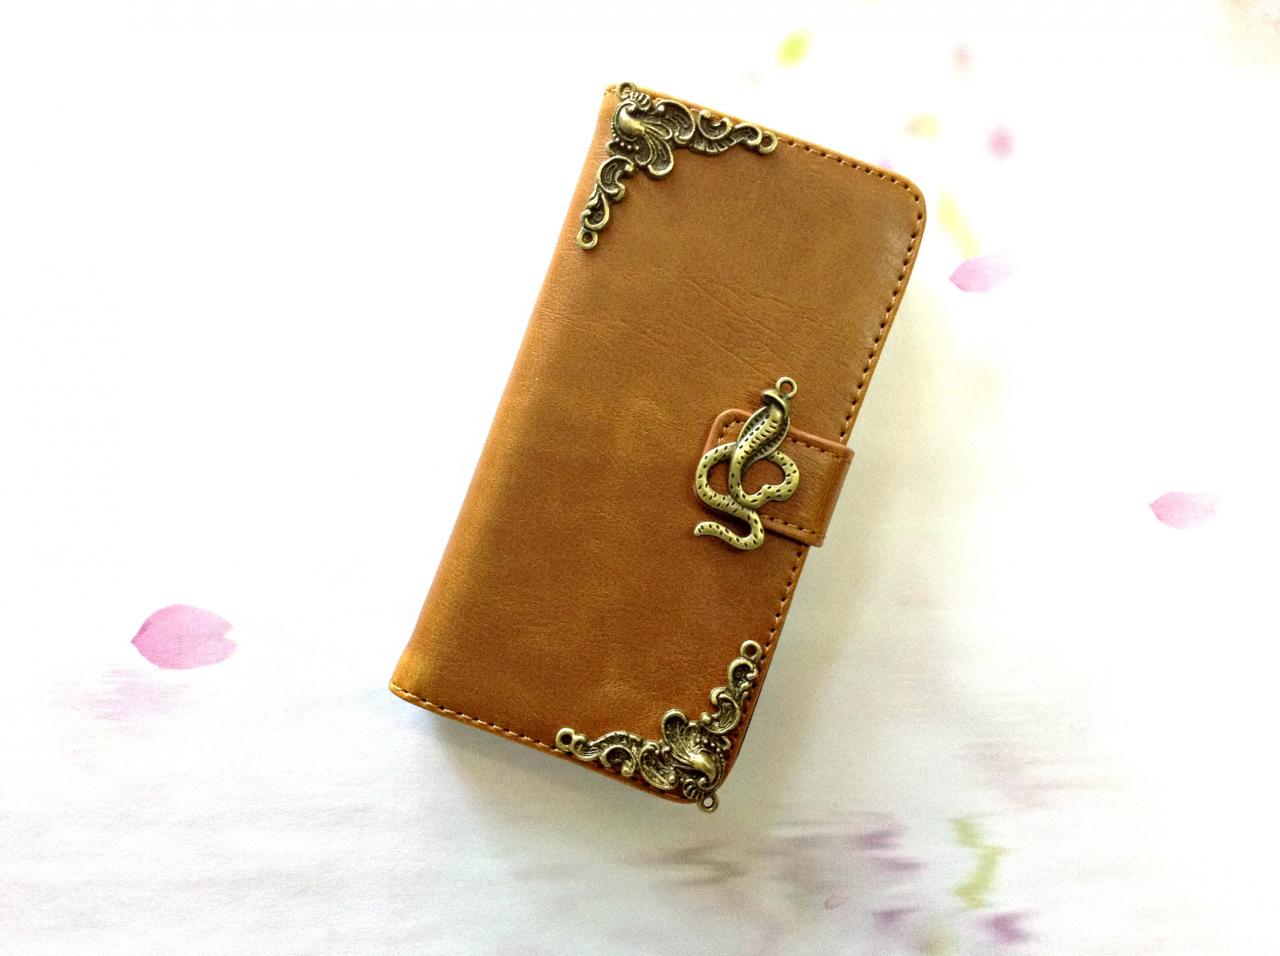 Snake Iphone 6 4.7 Leather Wallet Case, Vintage Iphone 6 Plus Leather Wallet Case, Iphone 5c, 5, 5s Leather Wallet Case, Samsung Galaxy S3, S4,